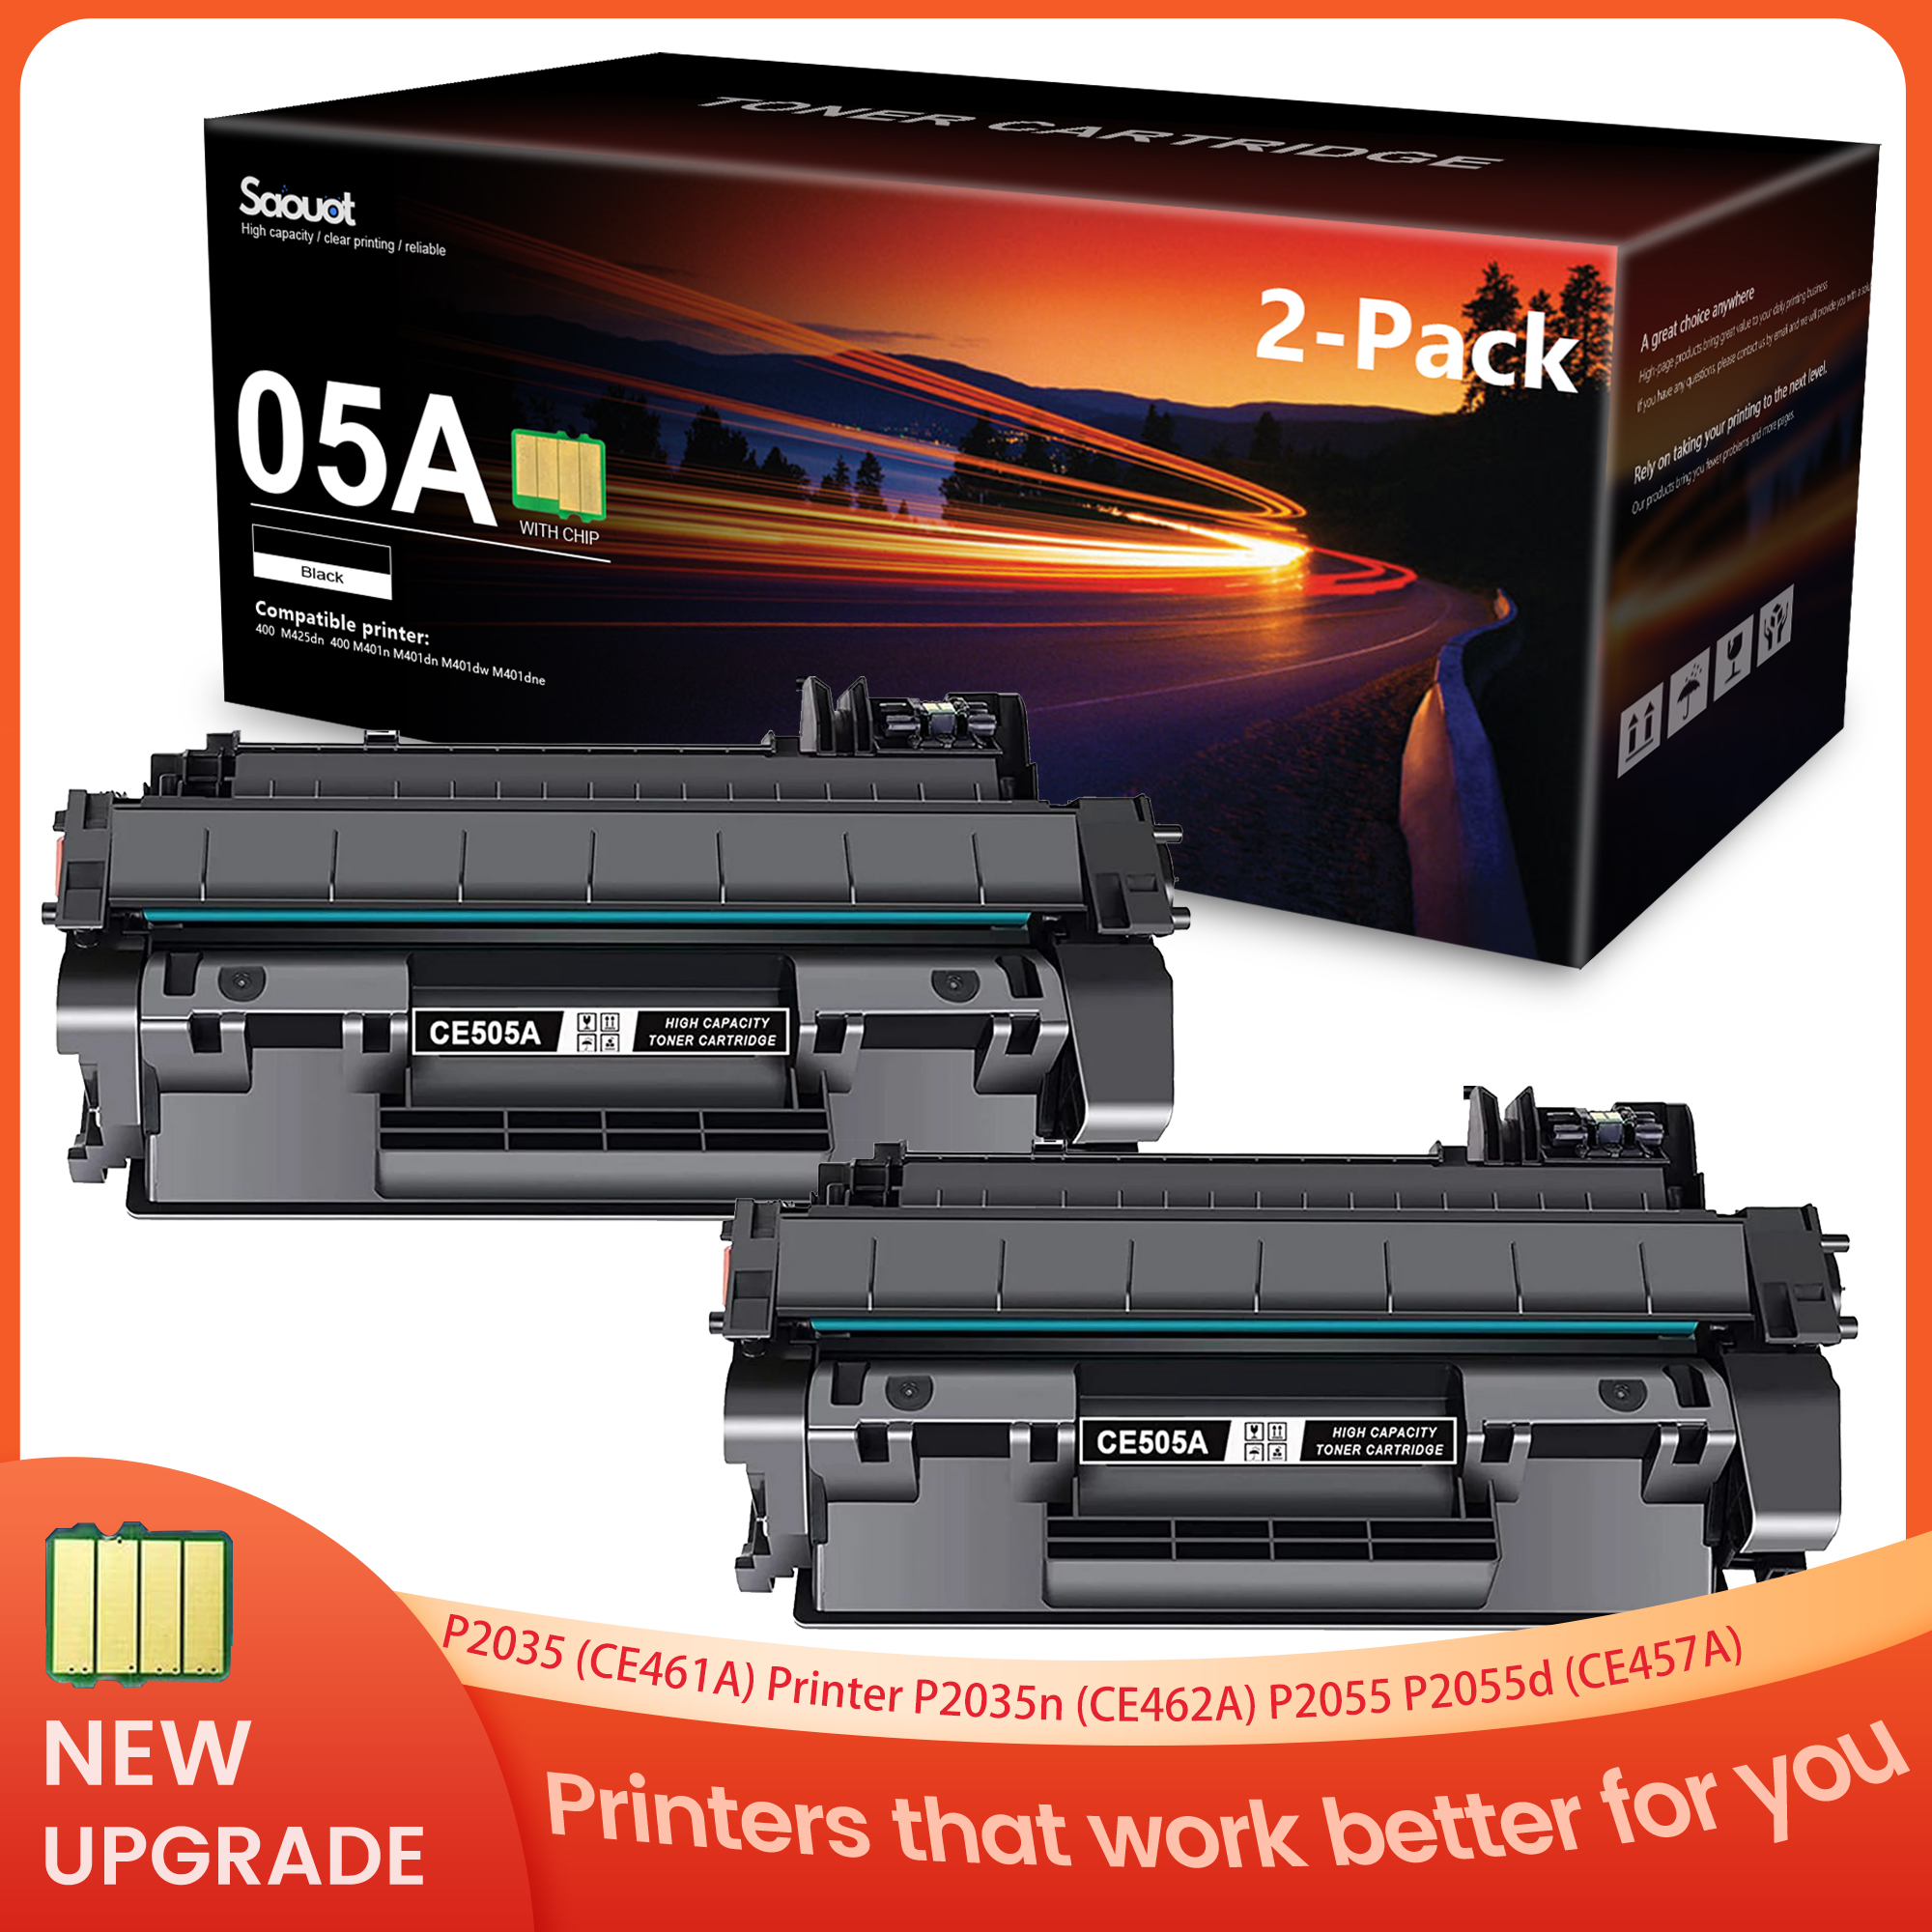 2 Pack Black 05A | CE505A Toner Cartridge Replacement for HP 05A | CE505A P2035 (CE461A) Printer P2035n (CE462A) P2055 P2055d (CE457A) P2055dn P2055x (CE460A) Printers. - image 1 of 6